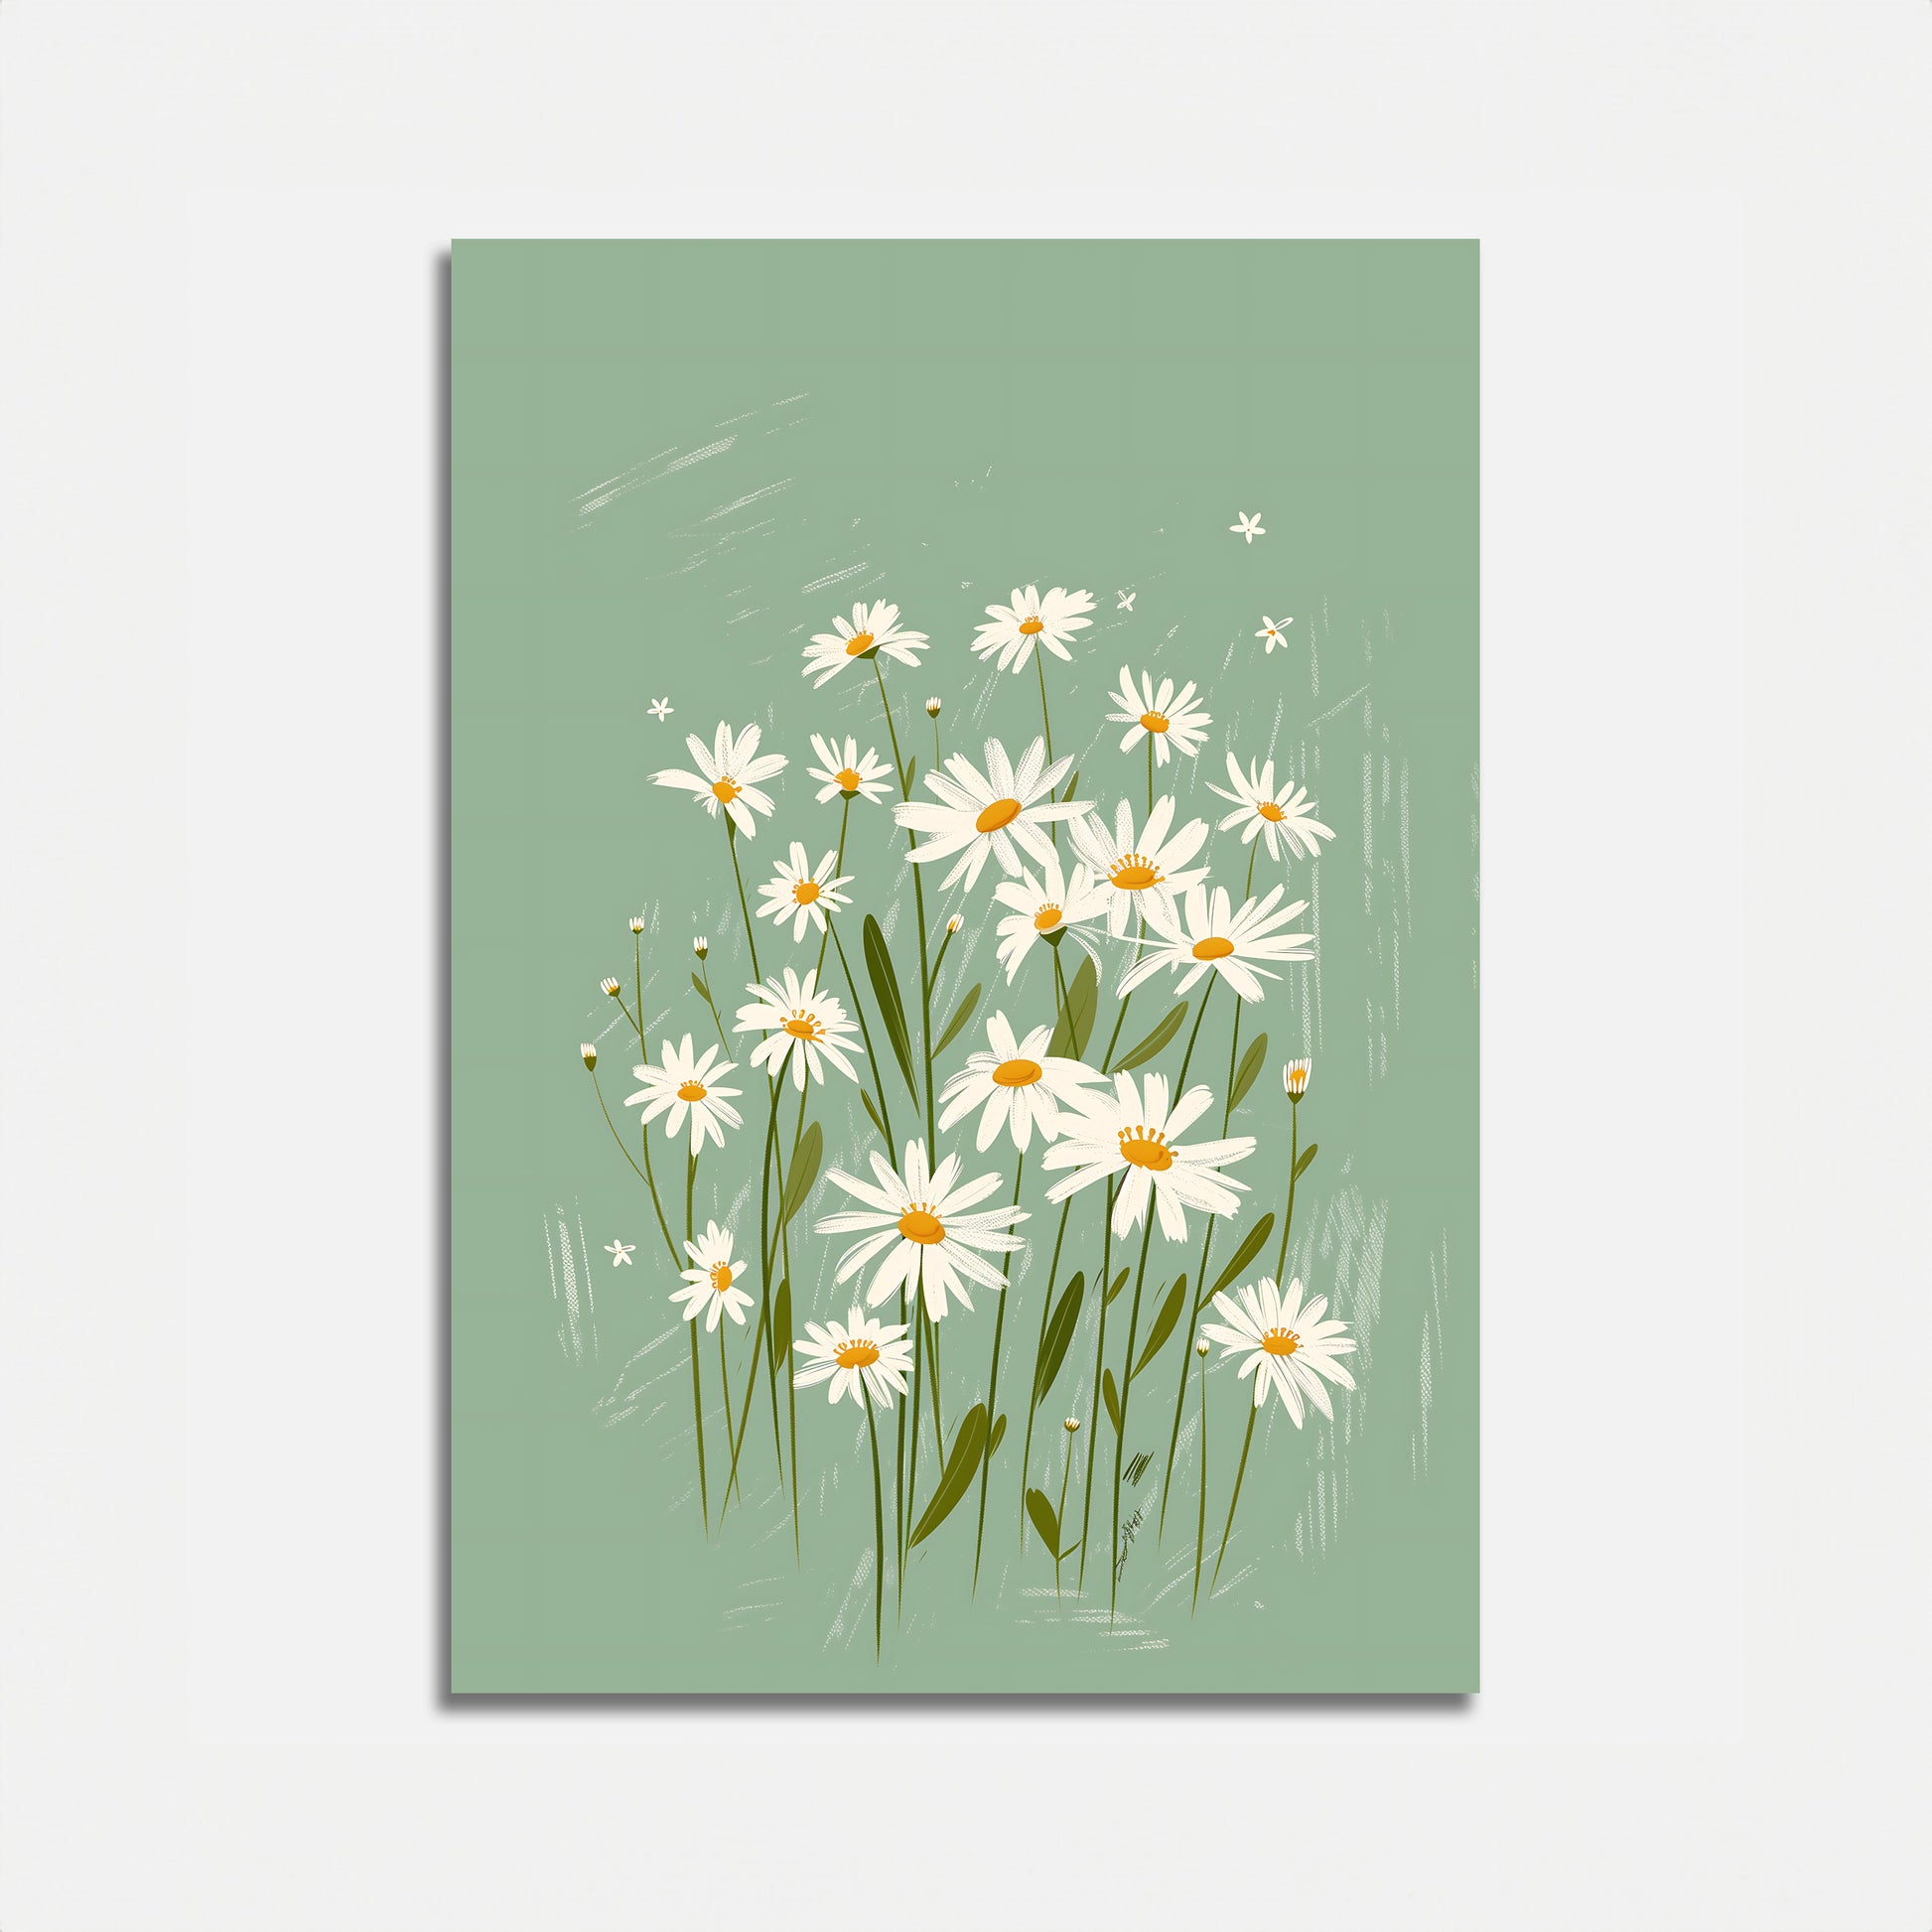 Illustration of a bunch of white daisies with a green background.